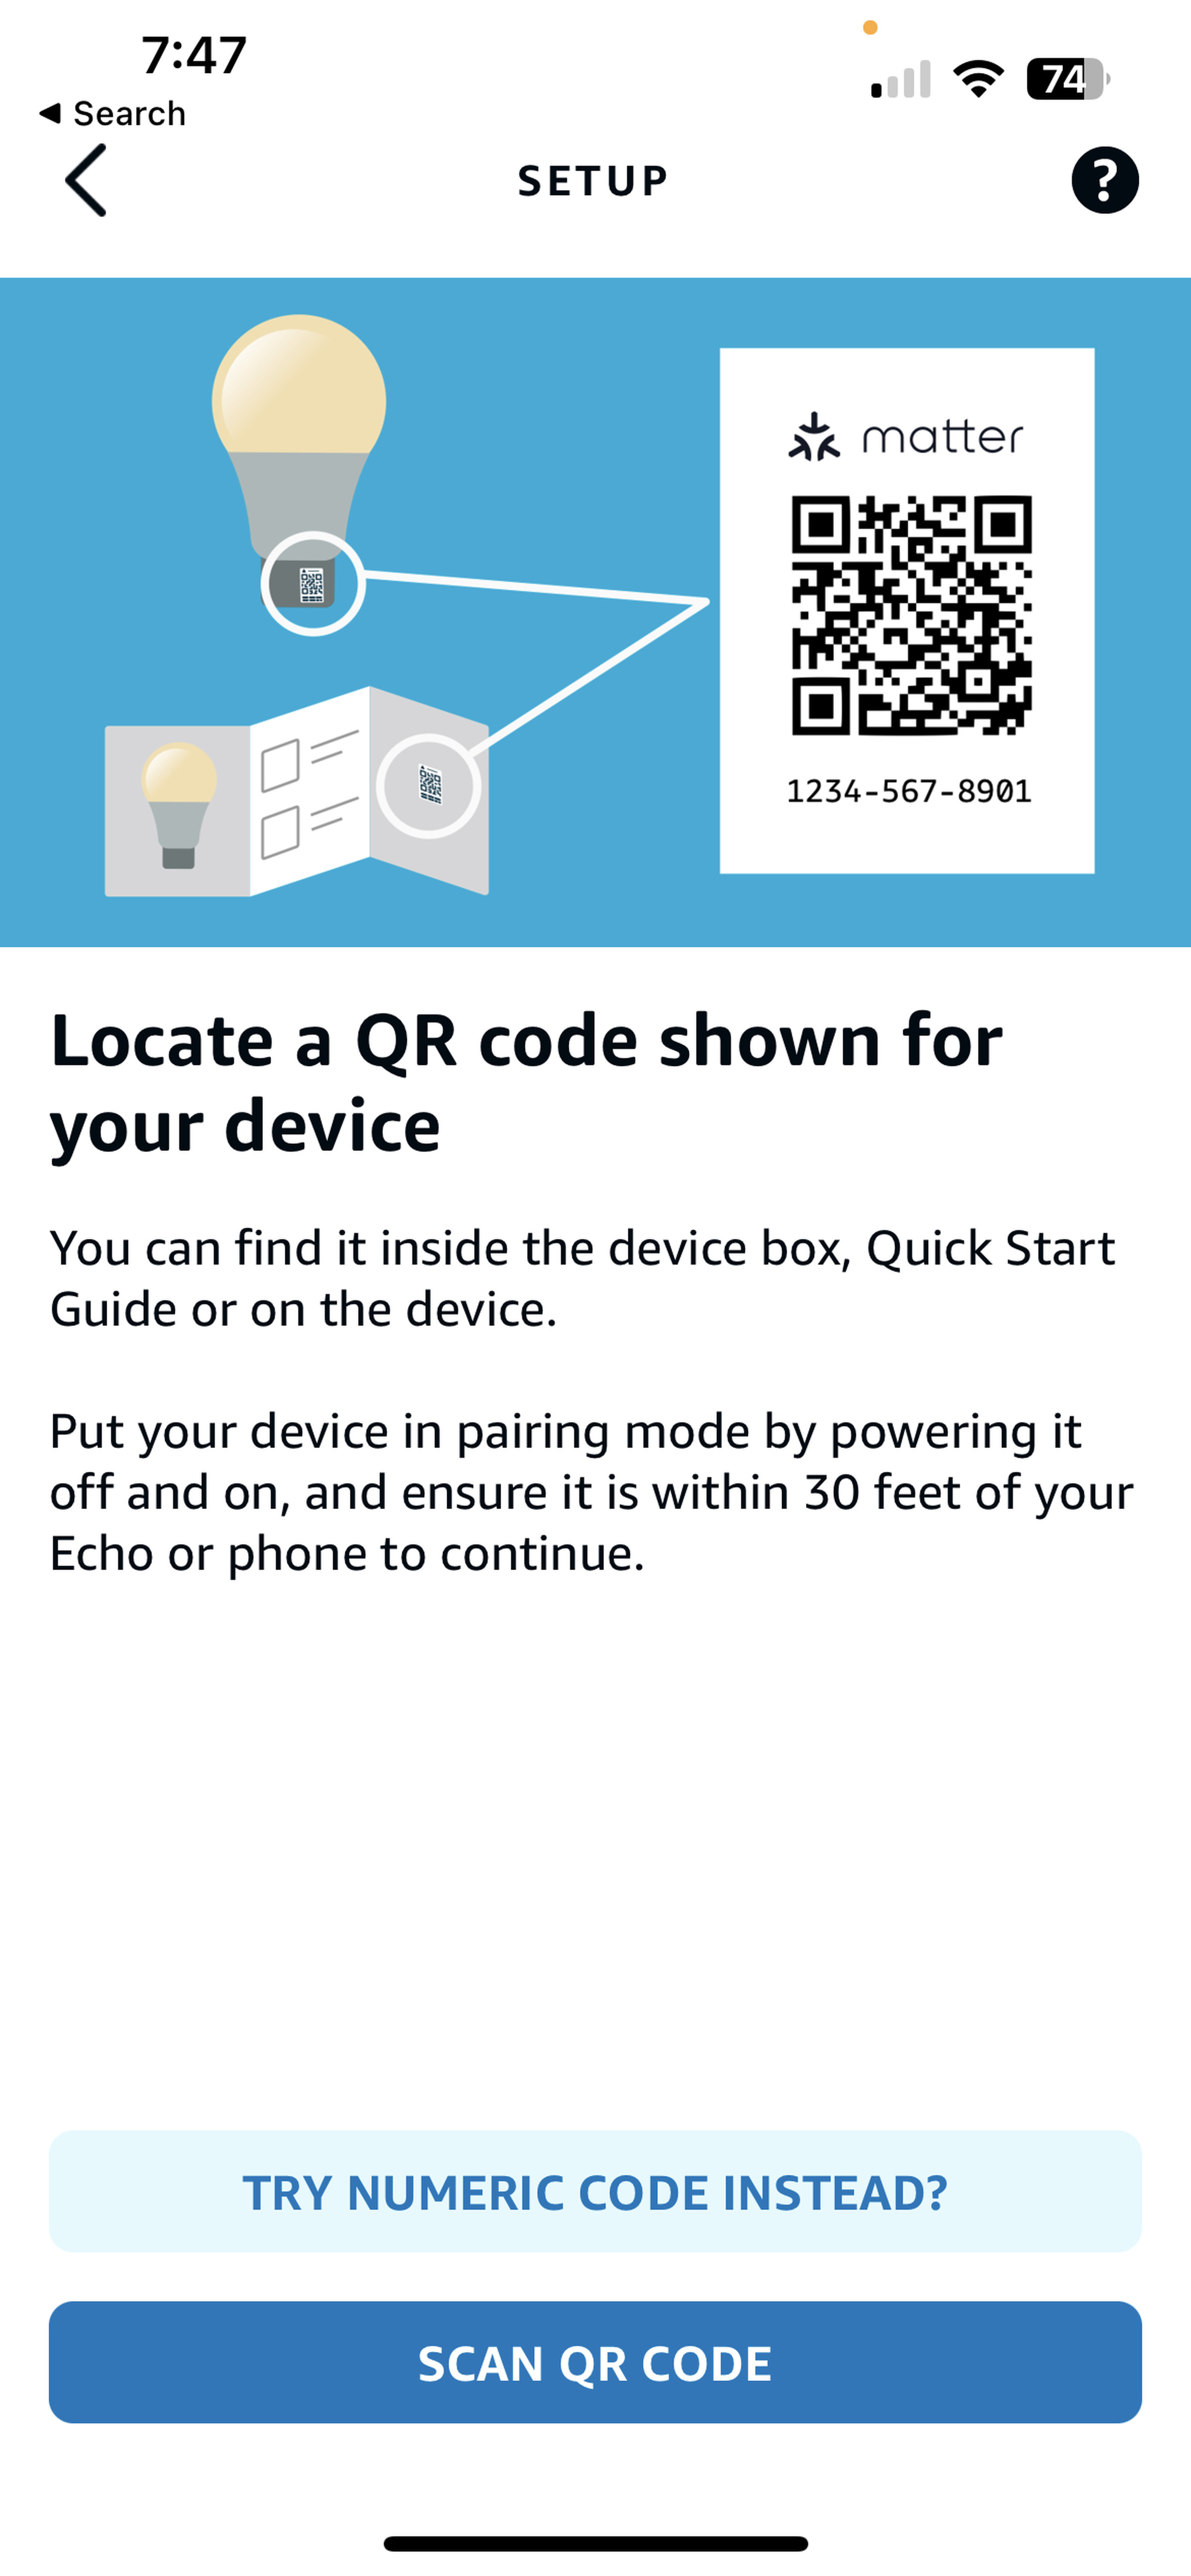 <em>Then it asked me to scan the code. As I was pairing from another platform this wouldn’t work. Although it’s not clear here, I needed to tap “Try numeric code instead” and paste in the code I had generated from the Apple Home app.</em>